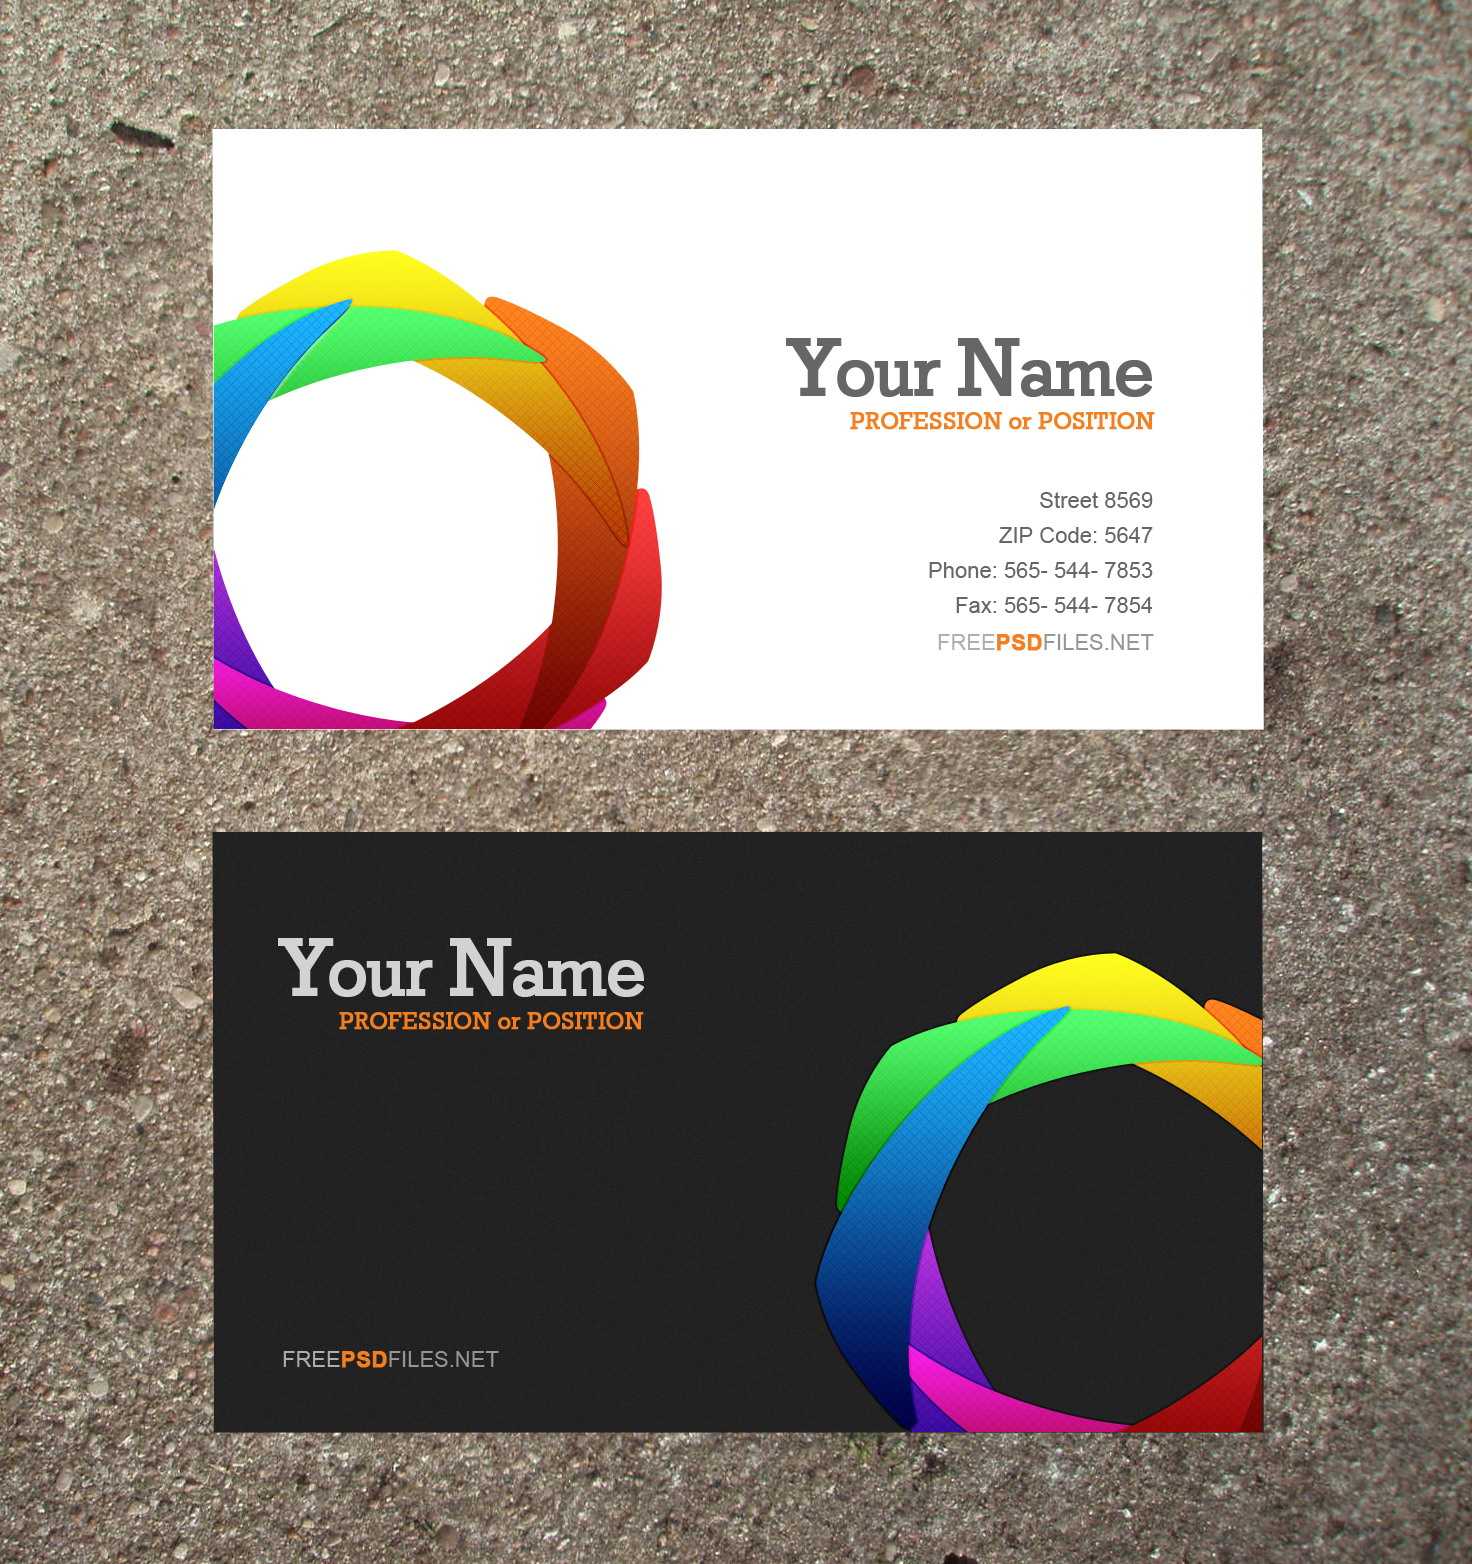 16 Business Card Templates Images – Free Business Card Within Free Business Cards Templates For Word